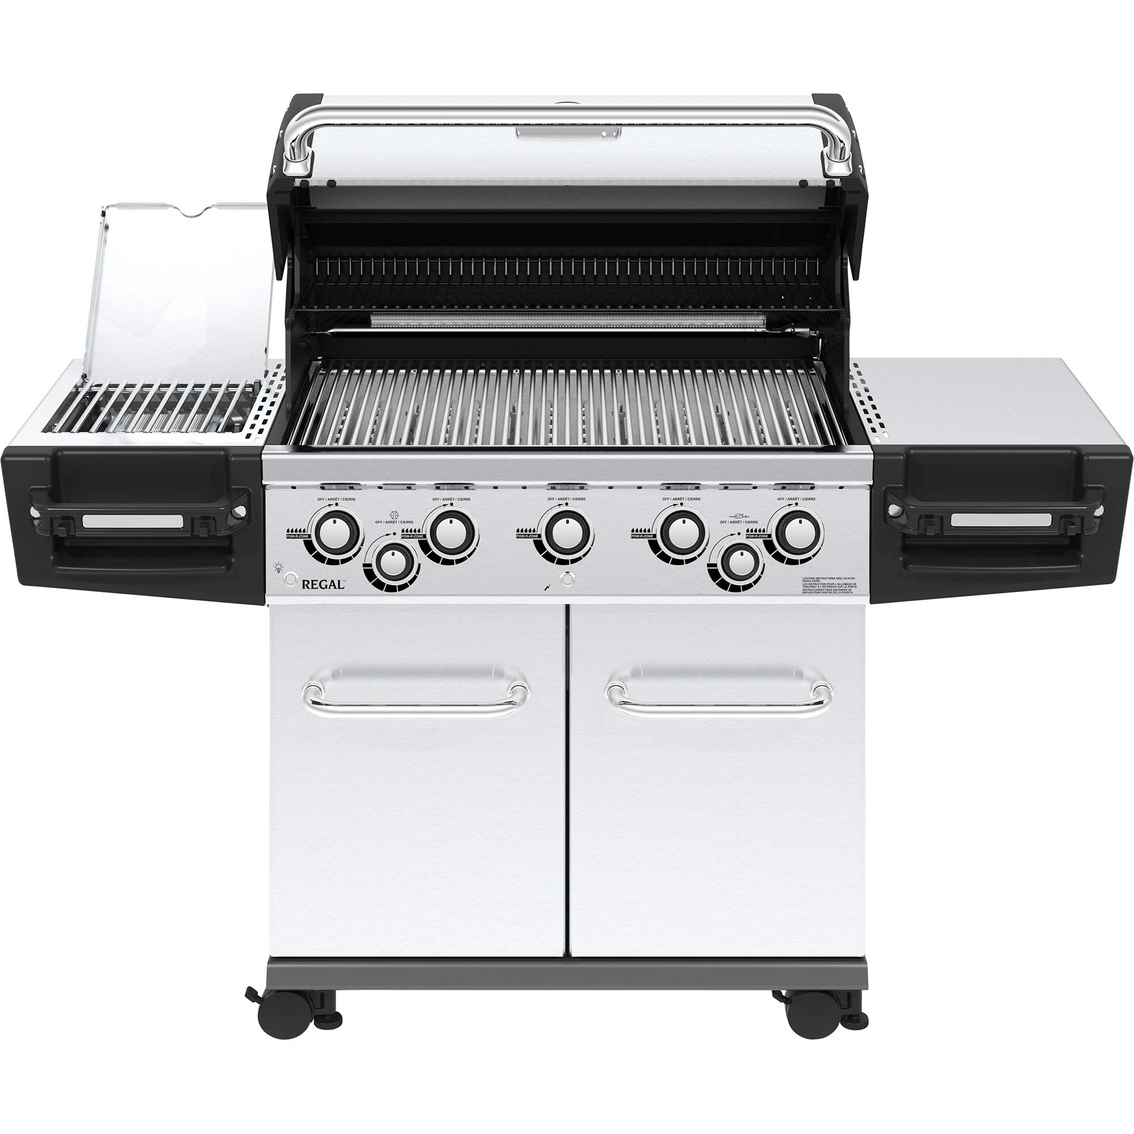 Broil King Regal S590 Pro Infrared Gas Grill - Image 2 of 10